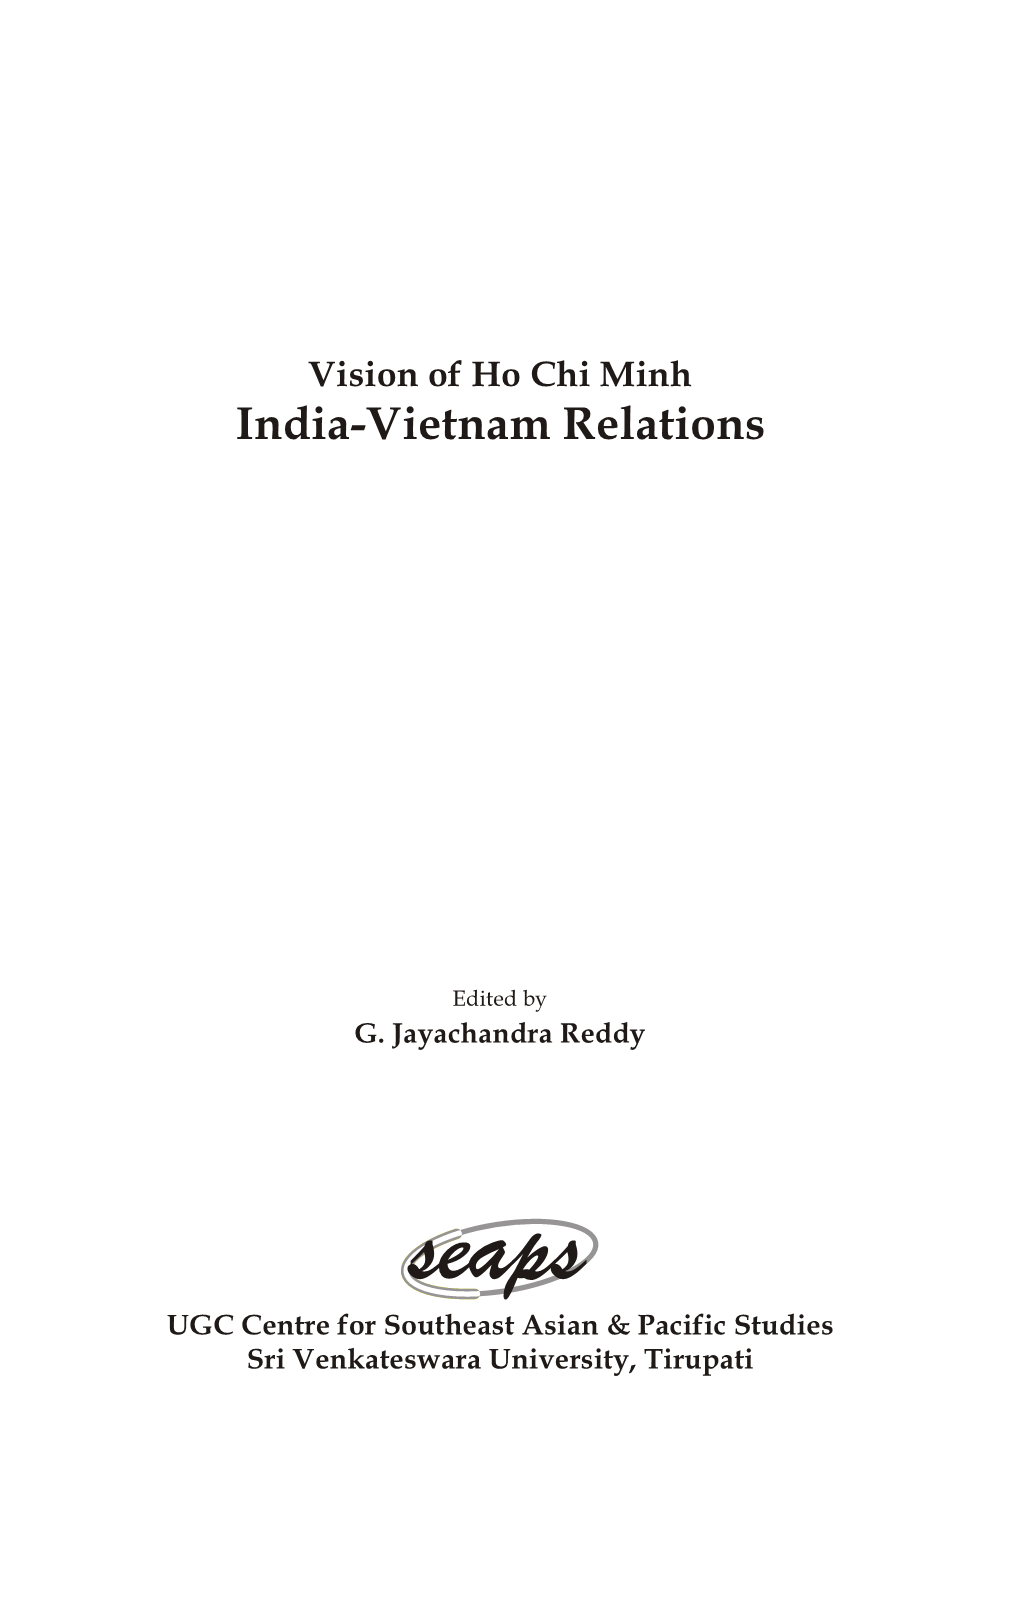 Vision of Ho Chi Minh: India-Vietnam Relations